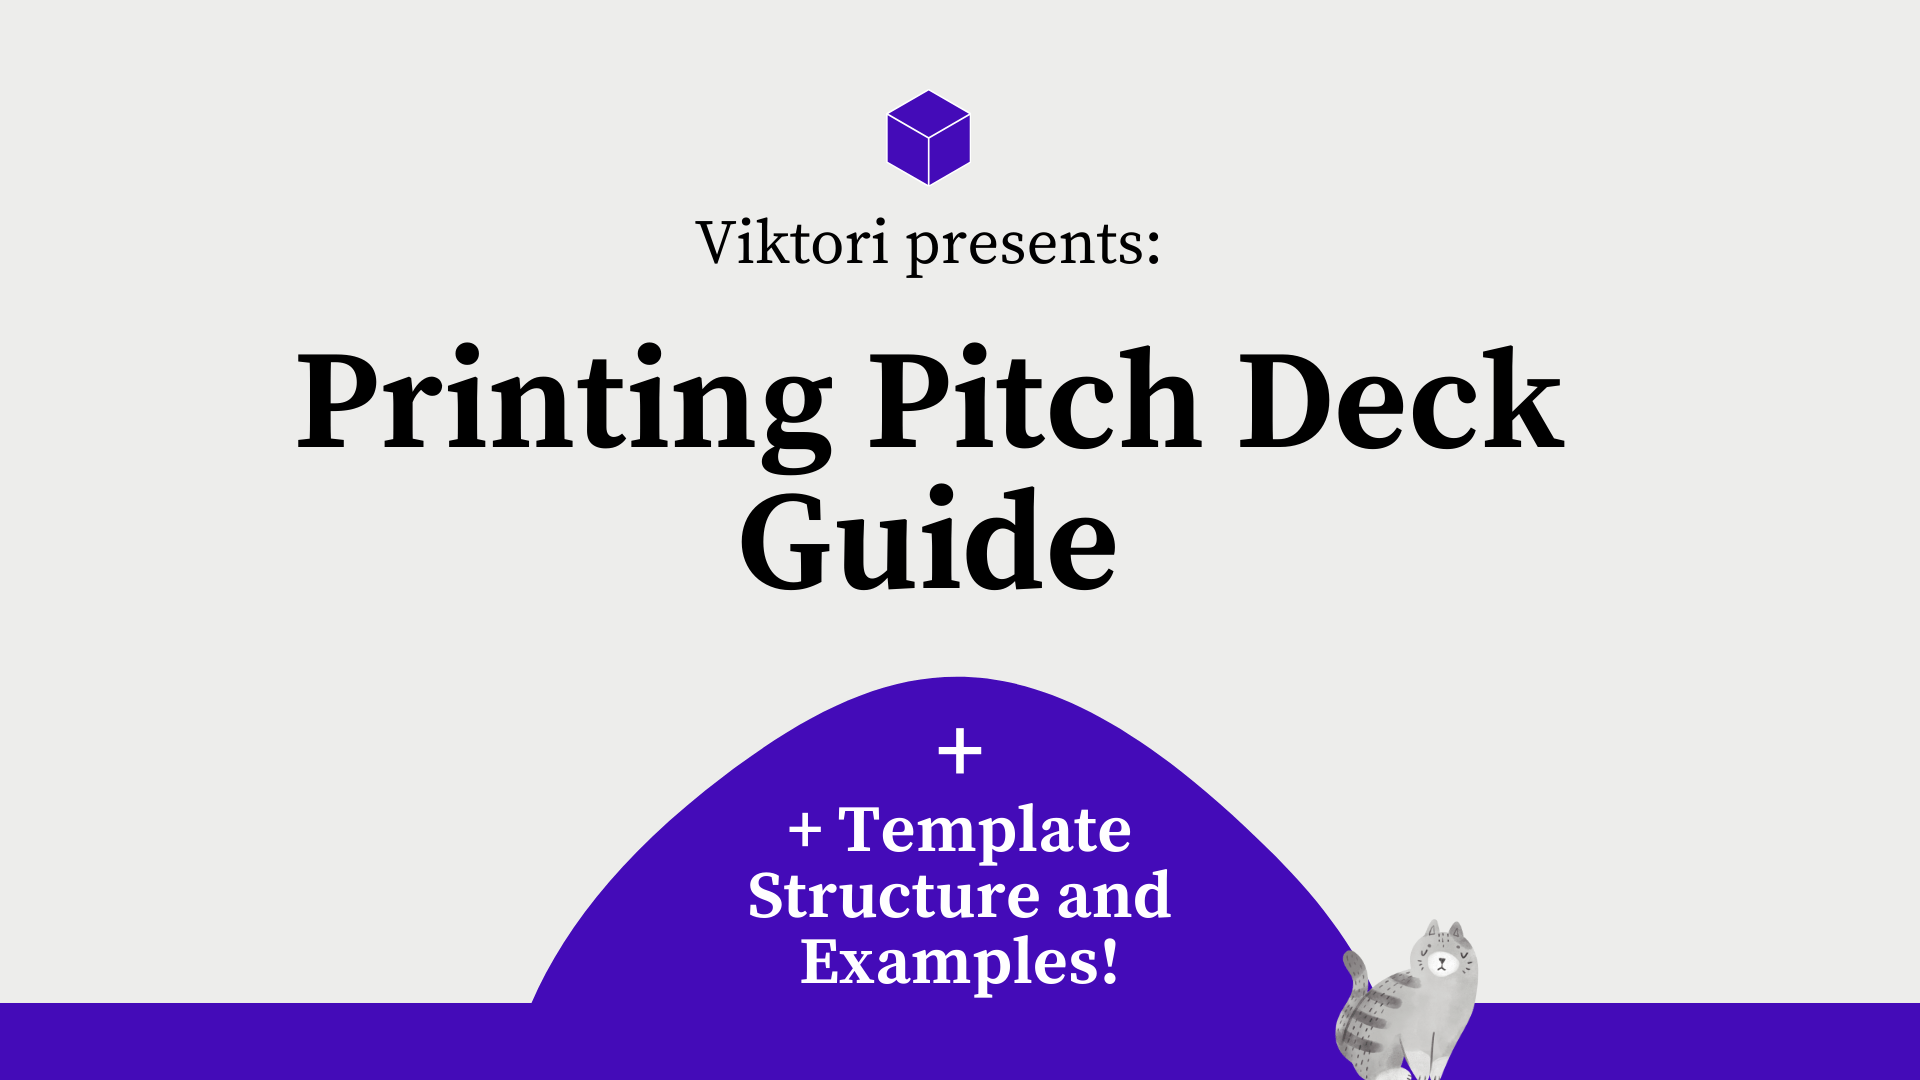 Printing Pitch Deck Guide